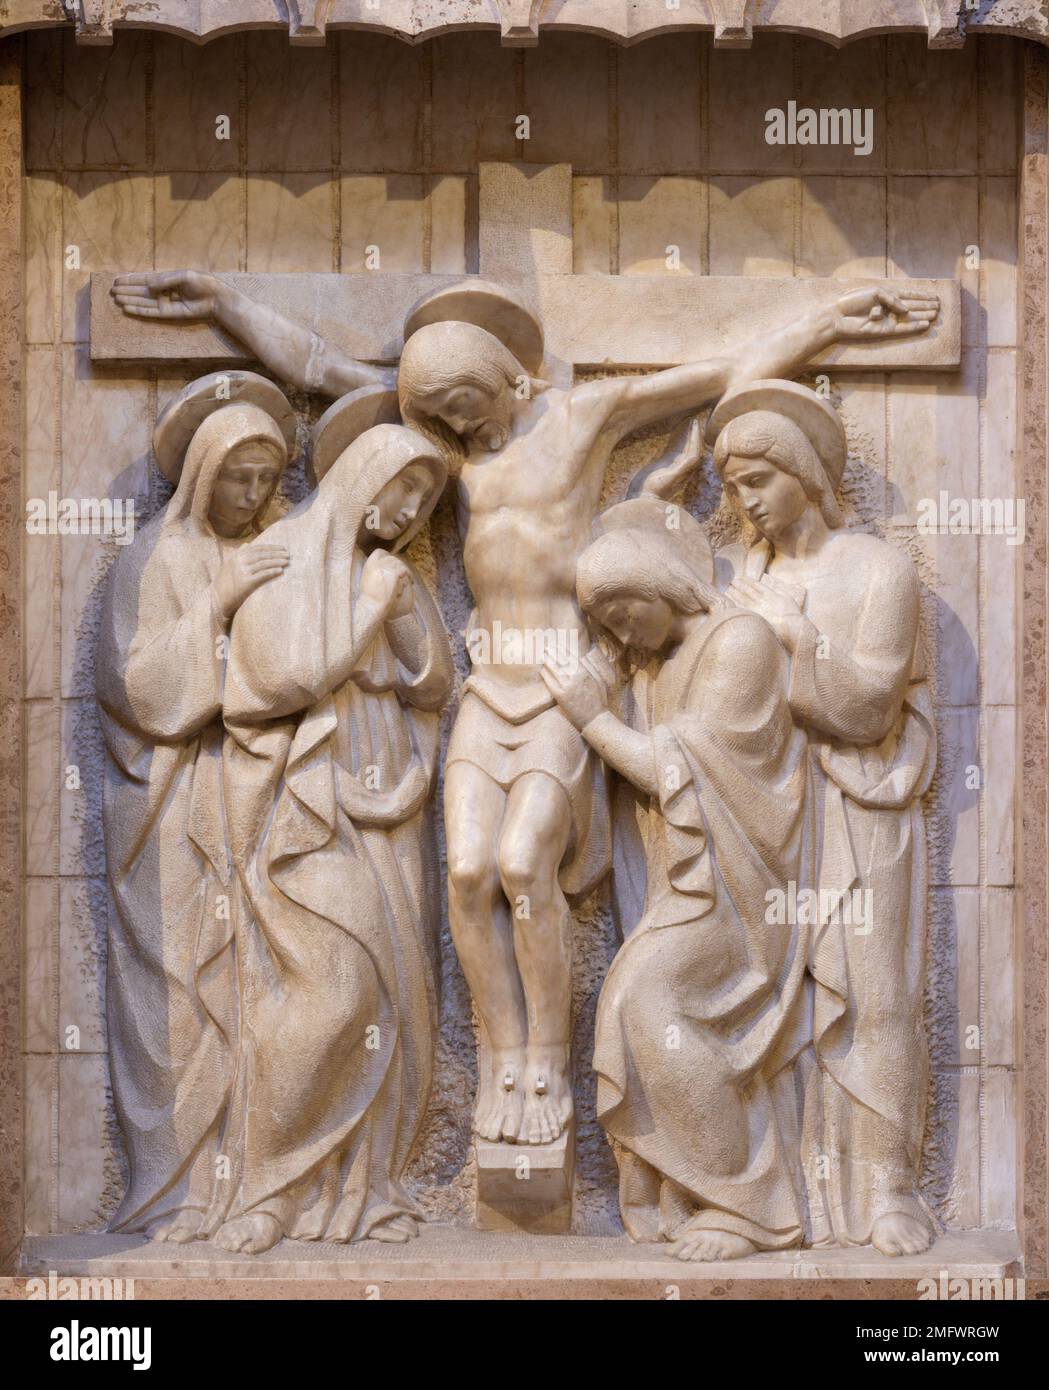 VALENCIA, SPAIN - FEBRUARY 17, 2022: The marble relief of Crucifixion in the church Basilica de San Vicente Ferrer from 20. cent. Stock Photo